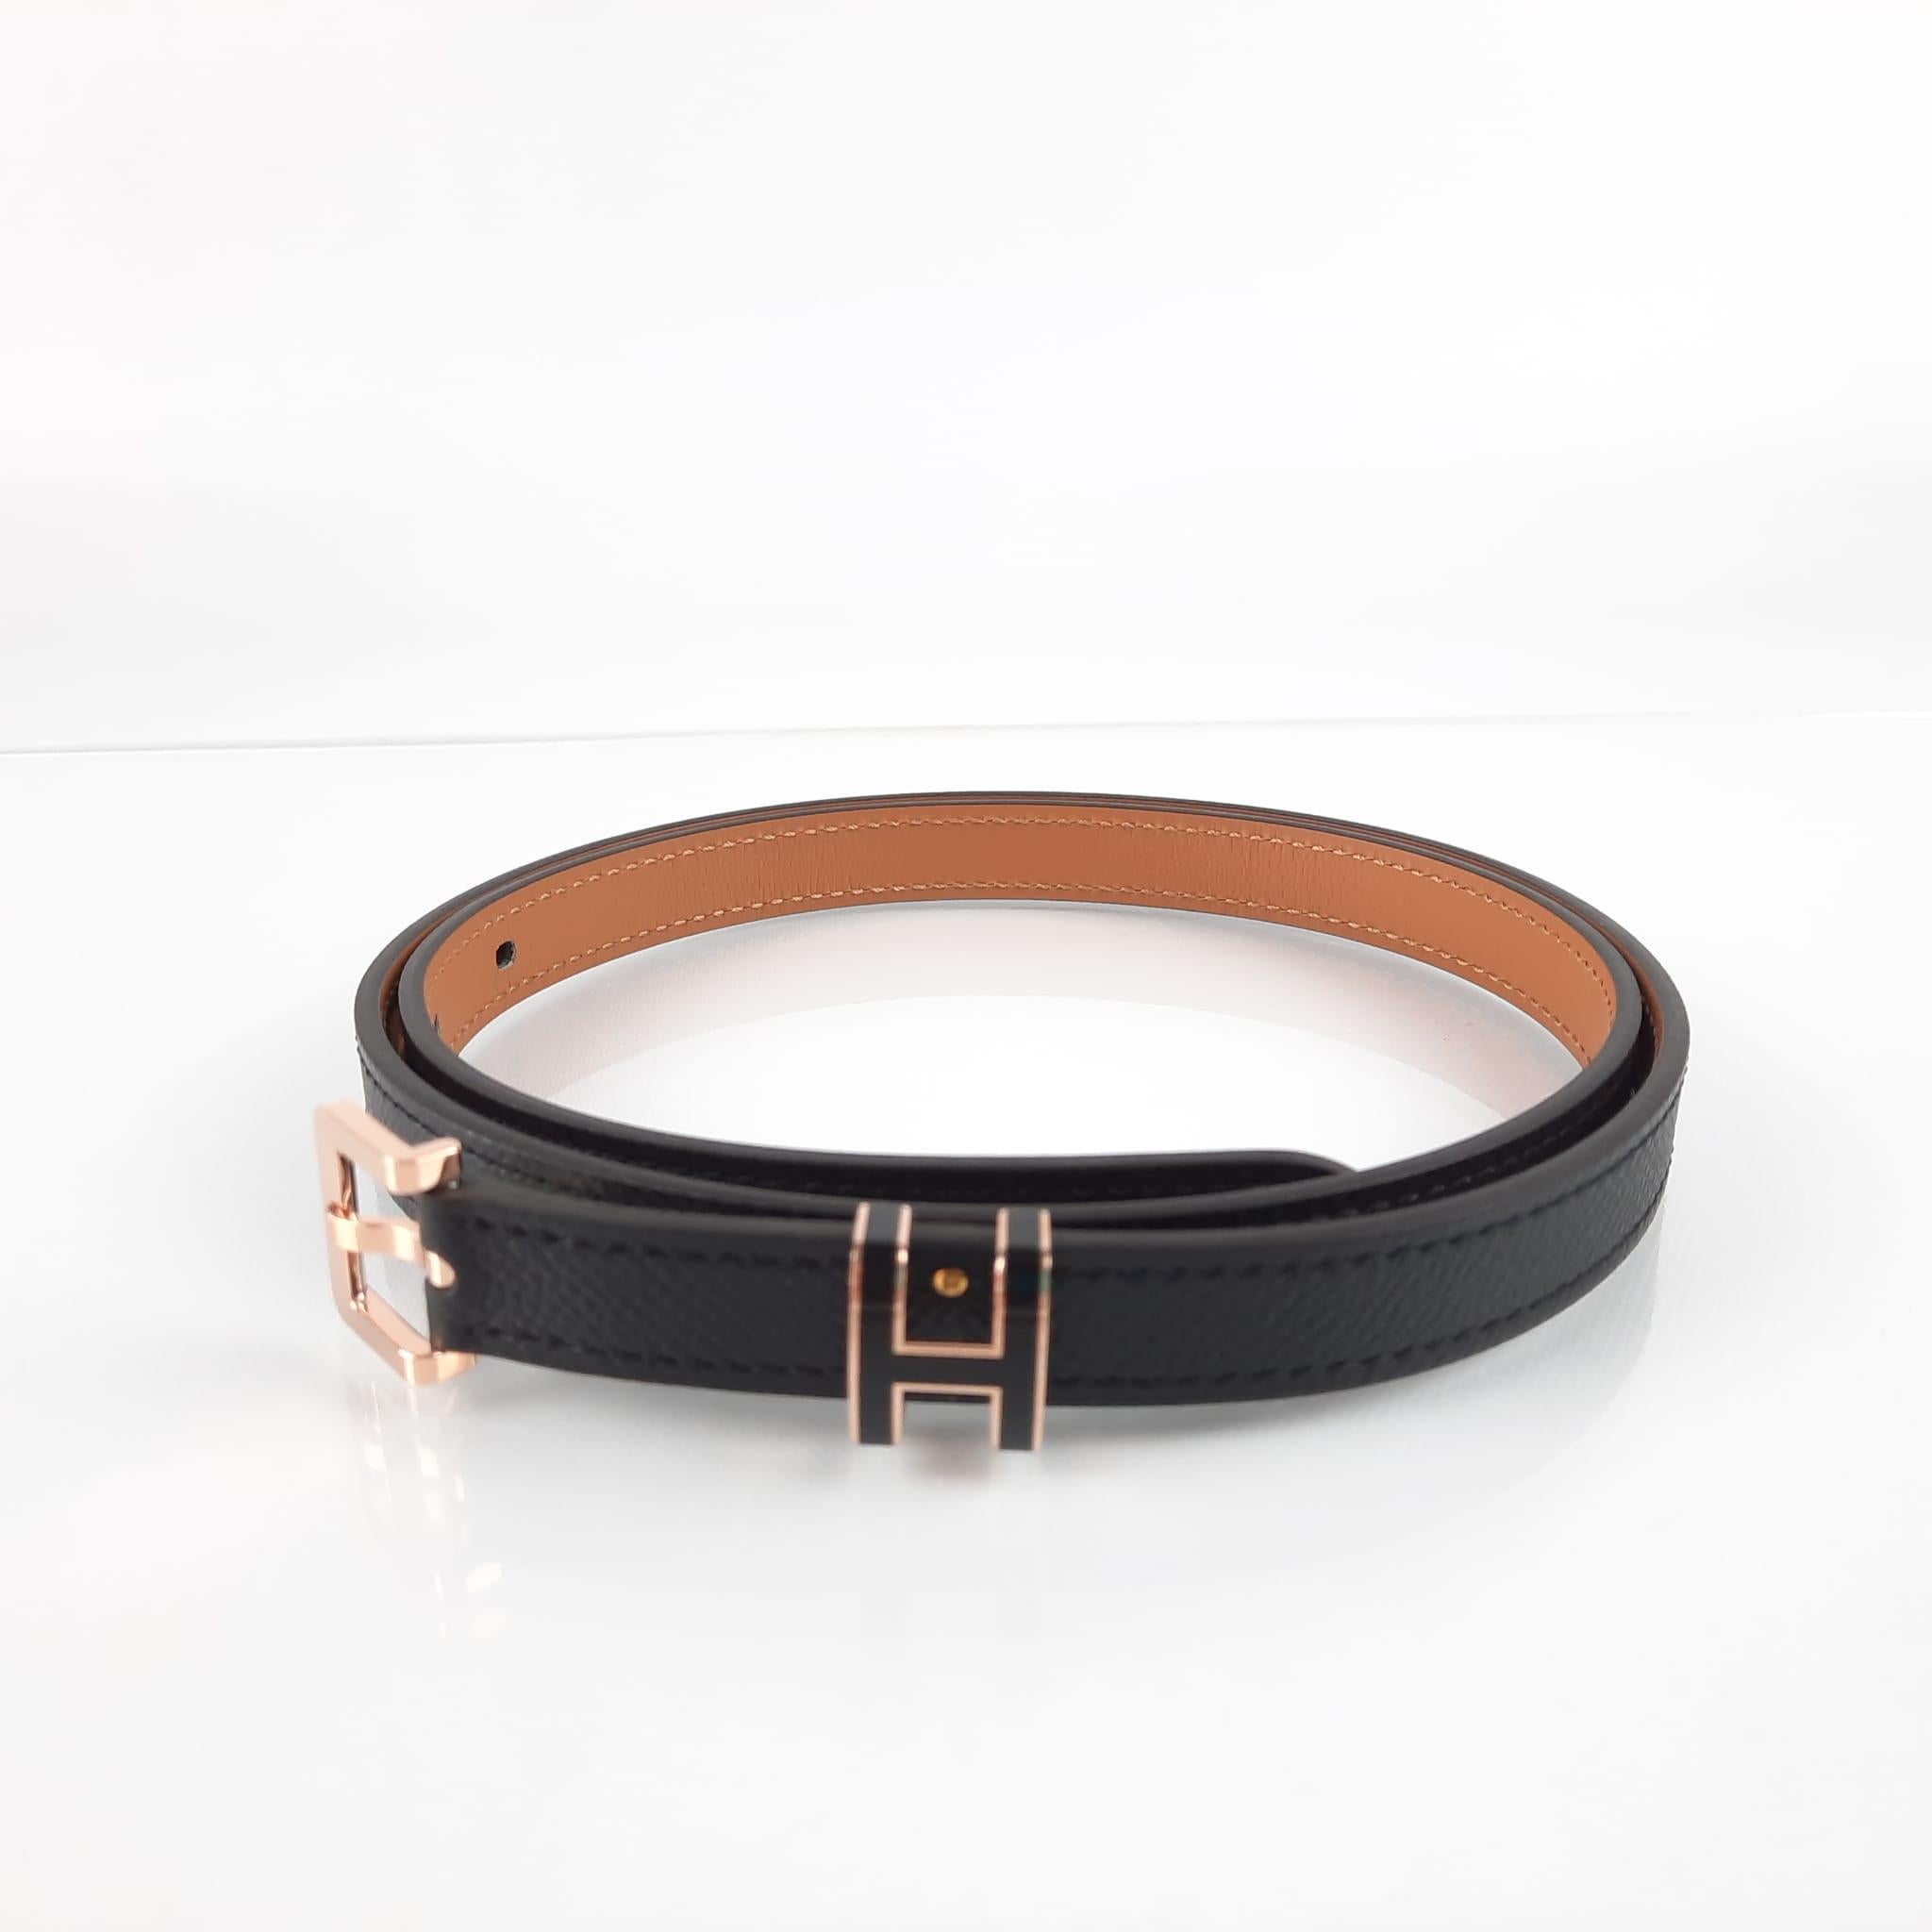 Size 80
Leather belt in Epsom calfskin with rose gold-plated buckle.
The iconic Pop H blends in, tone-on-tone, in the role of a loop passing on a thin and feminine belt.